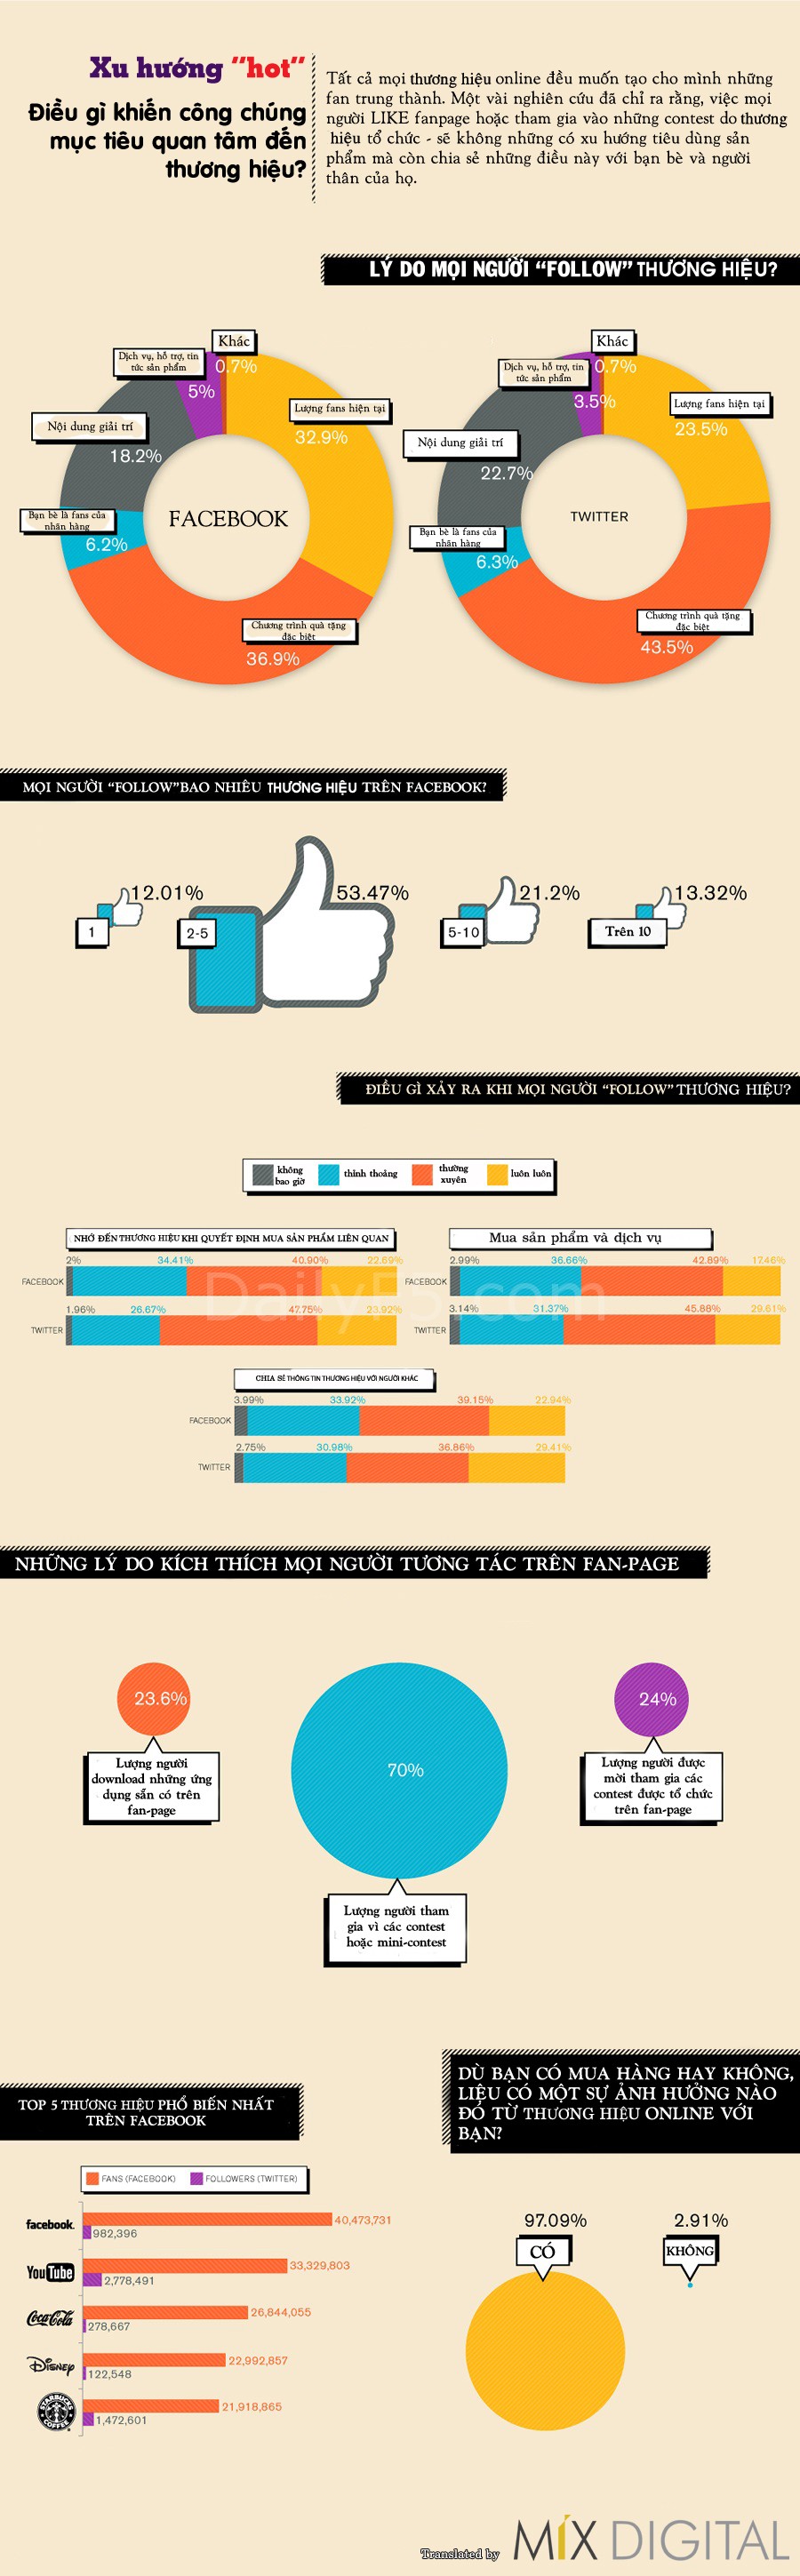 why-people-follow-brands-social-media-infographic2